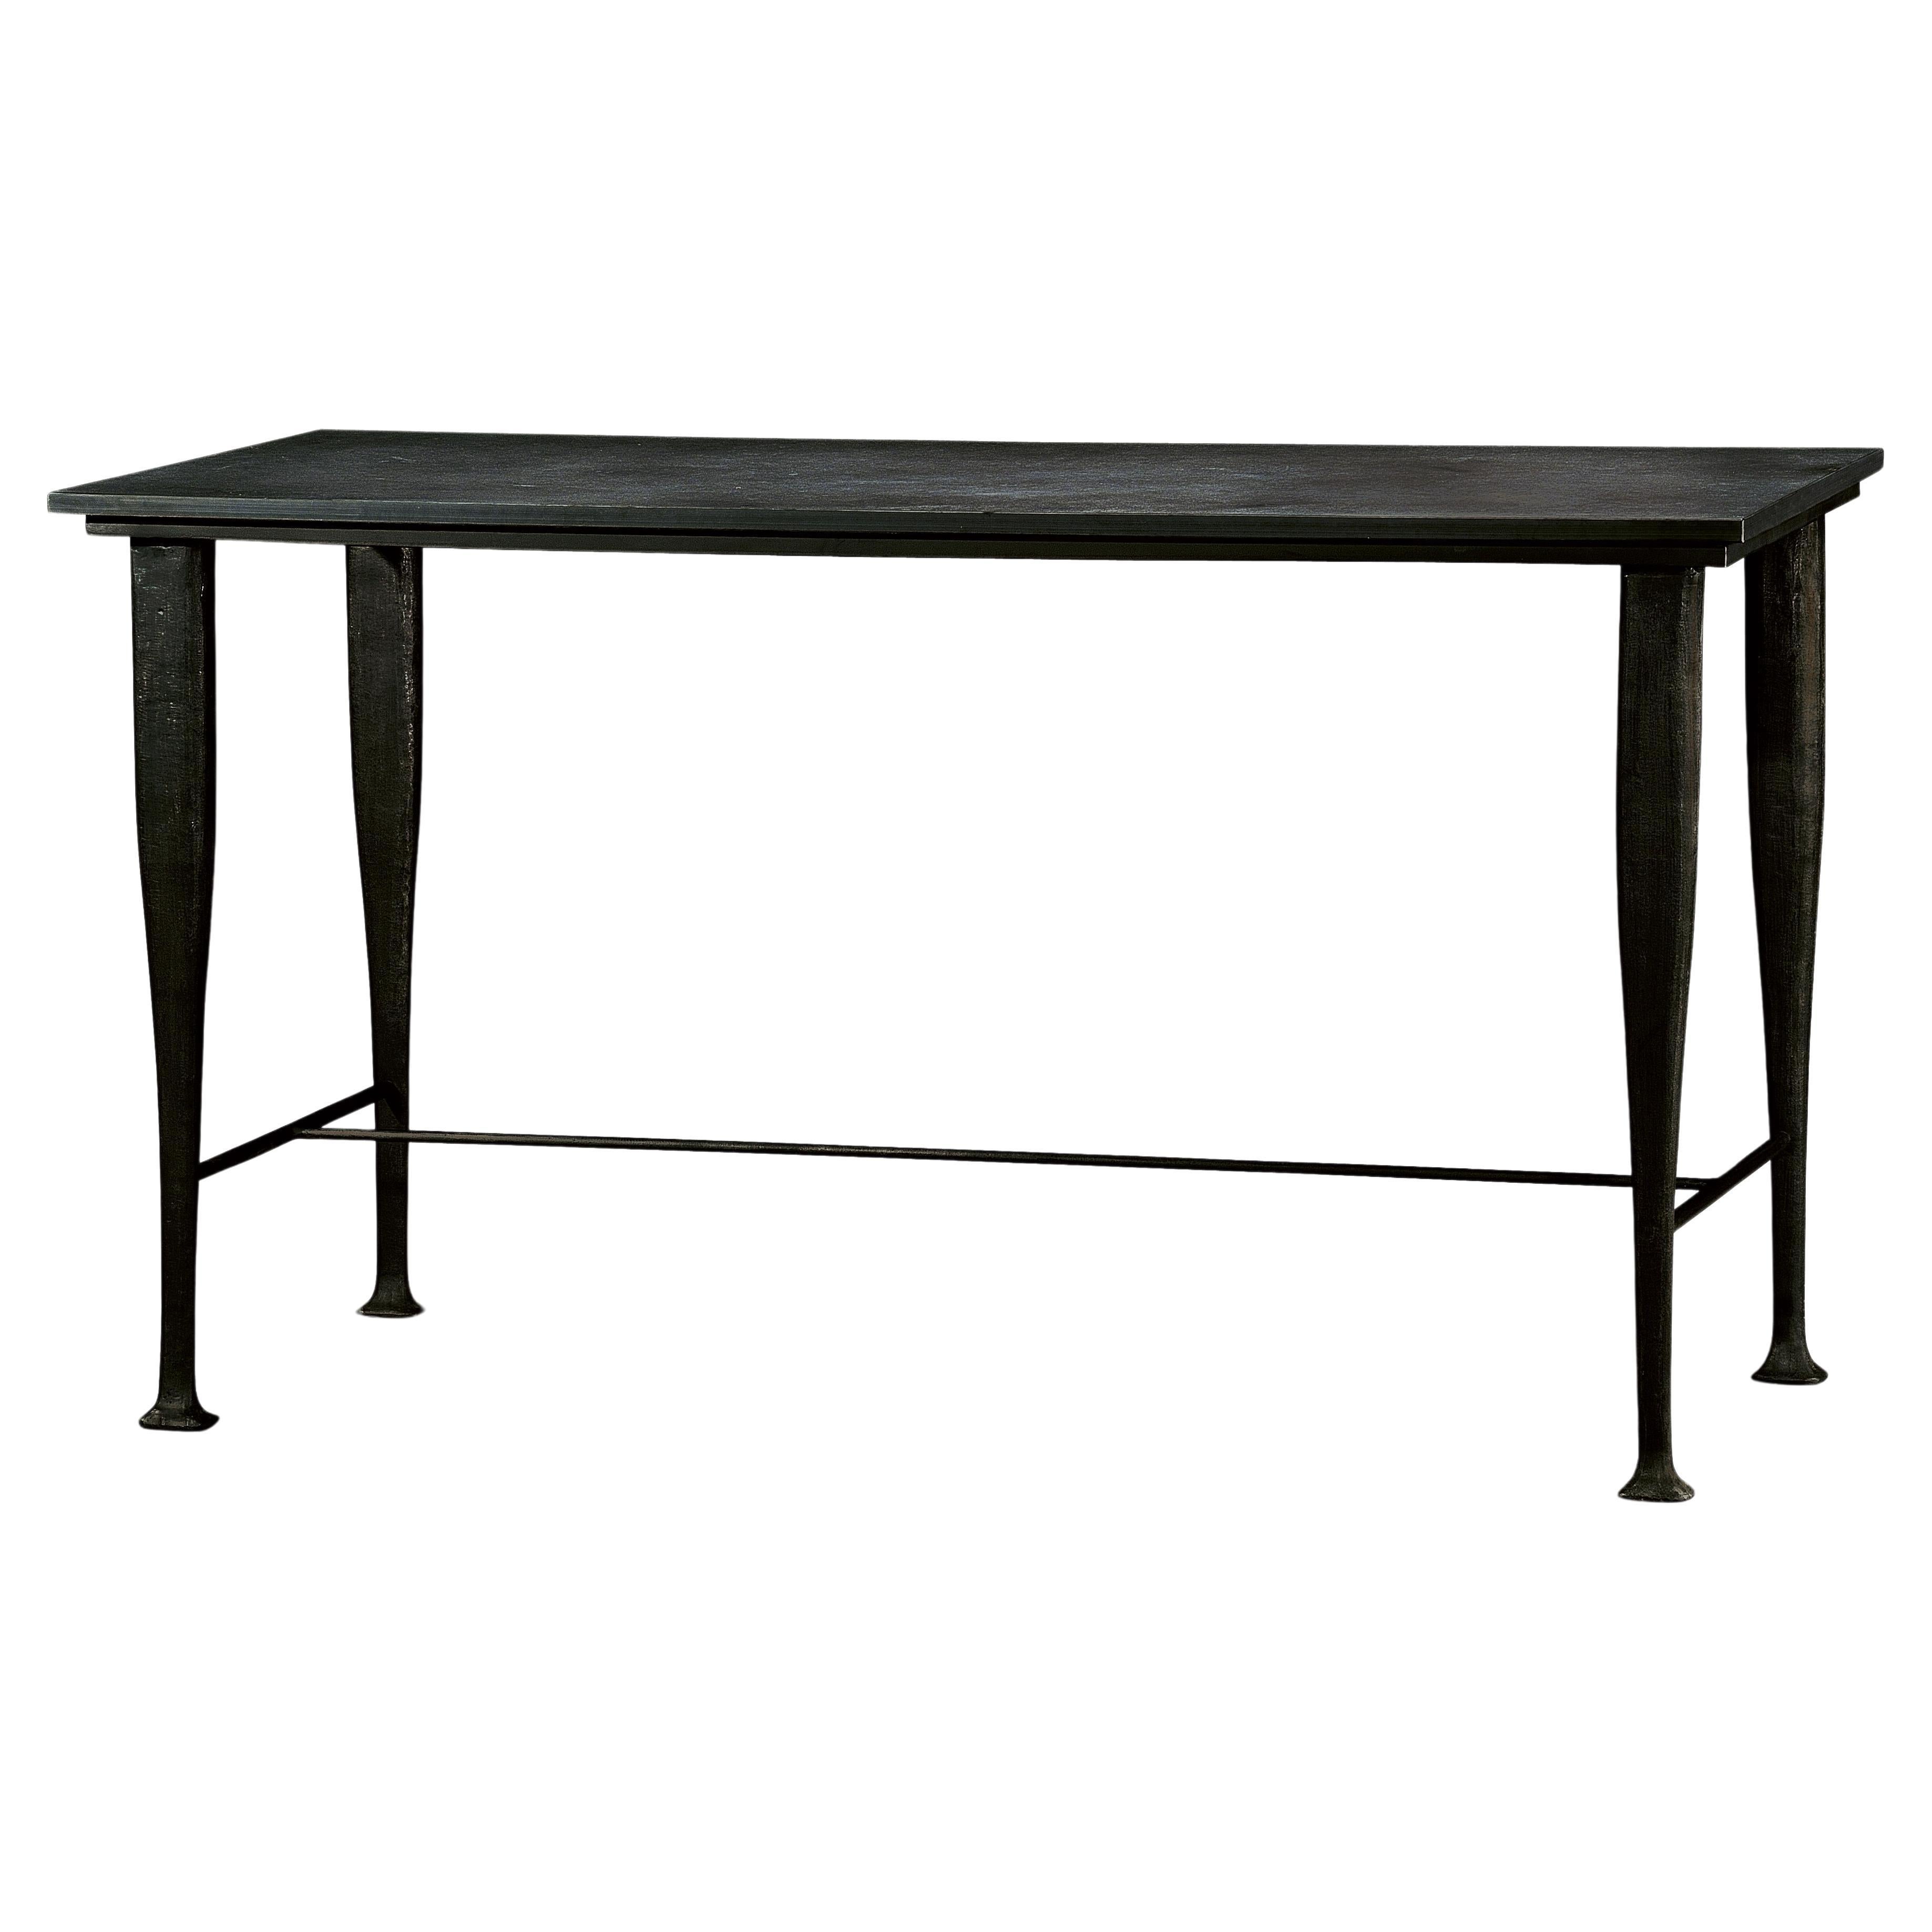 Villiers Console with metal tapered legs and slate top